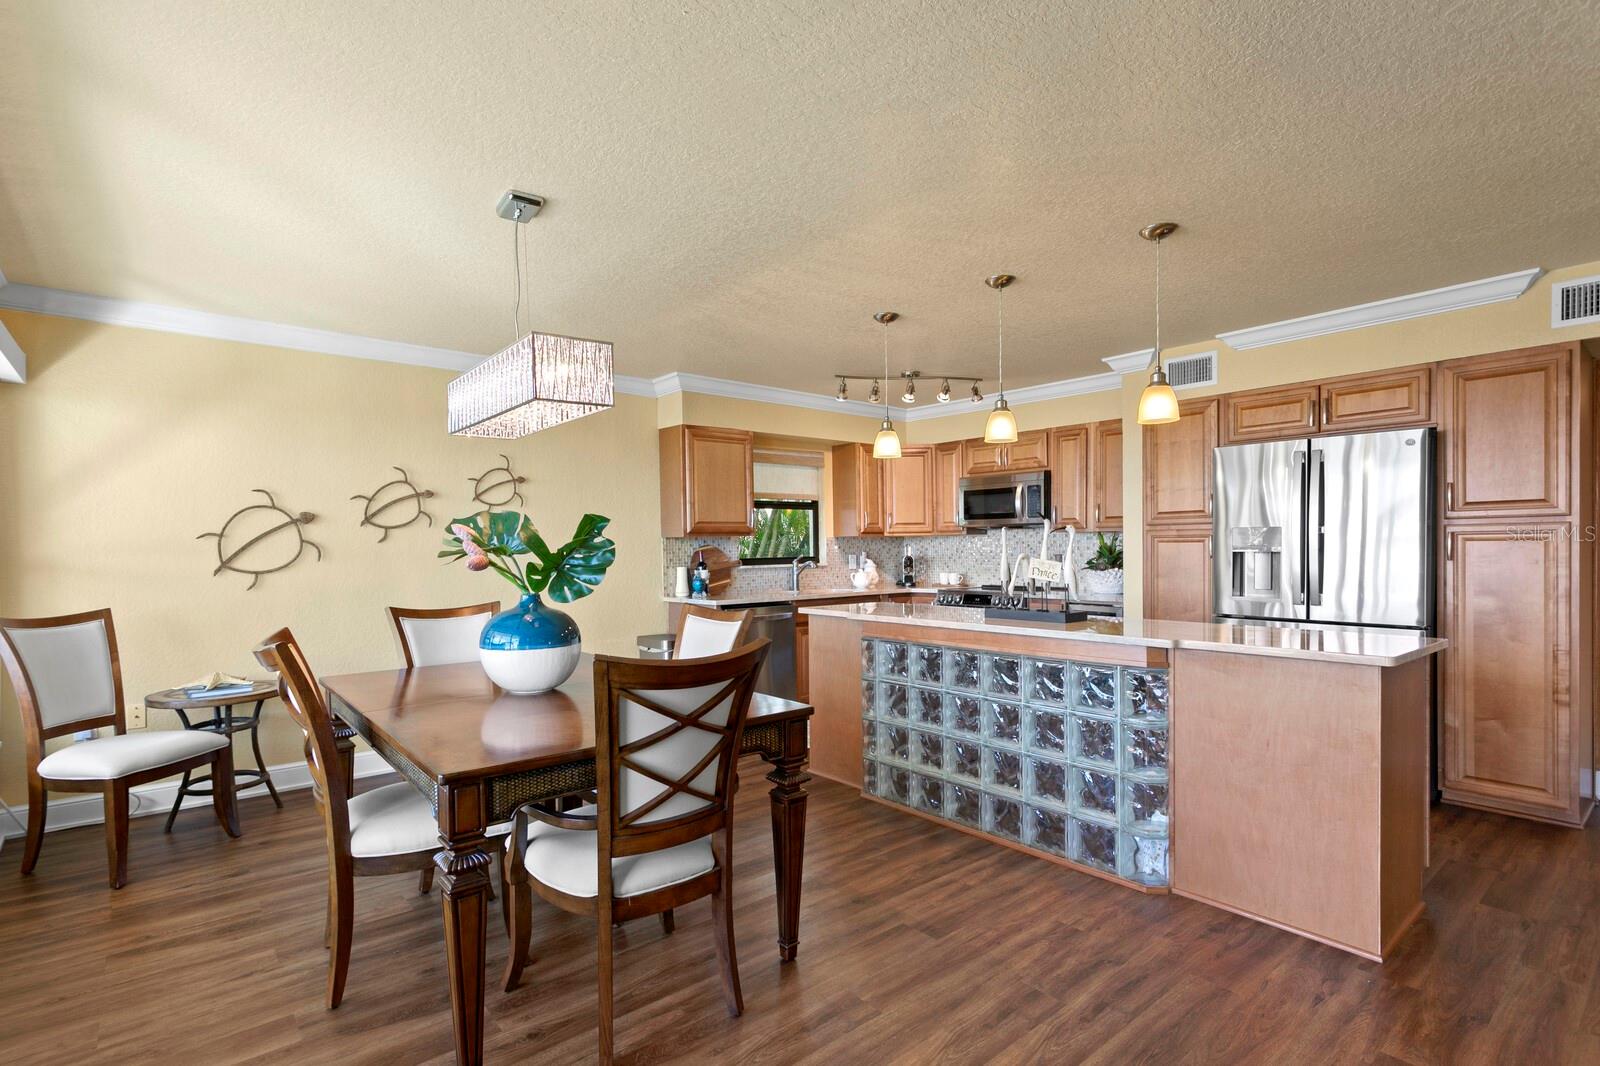 Kitchen with island opens to the dining room and also enjoys views of the beach.